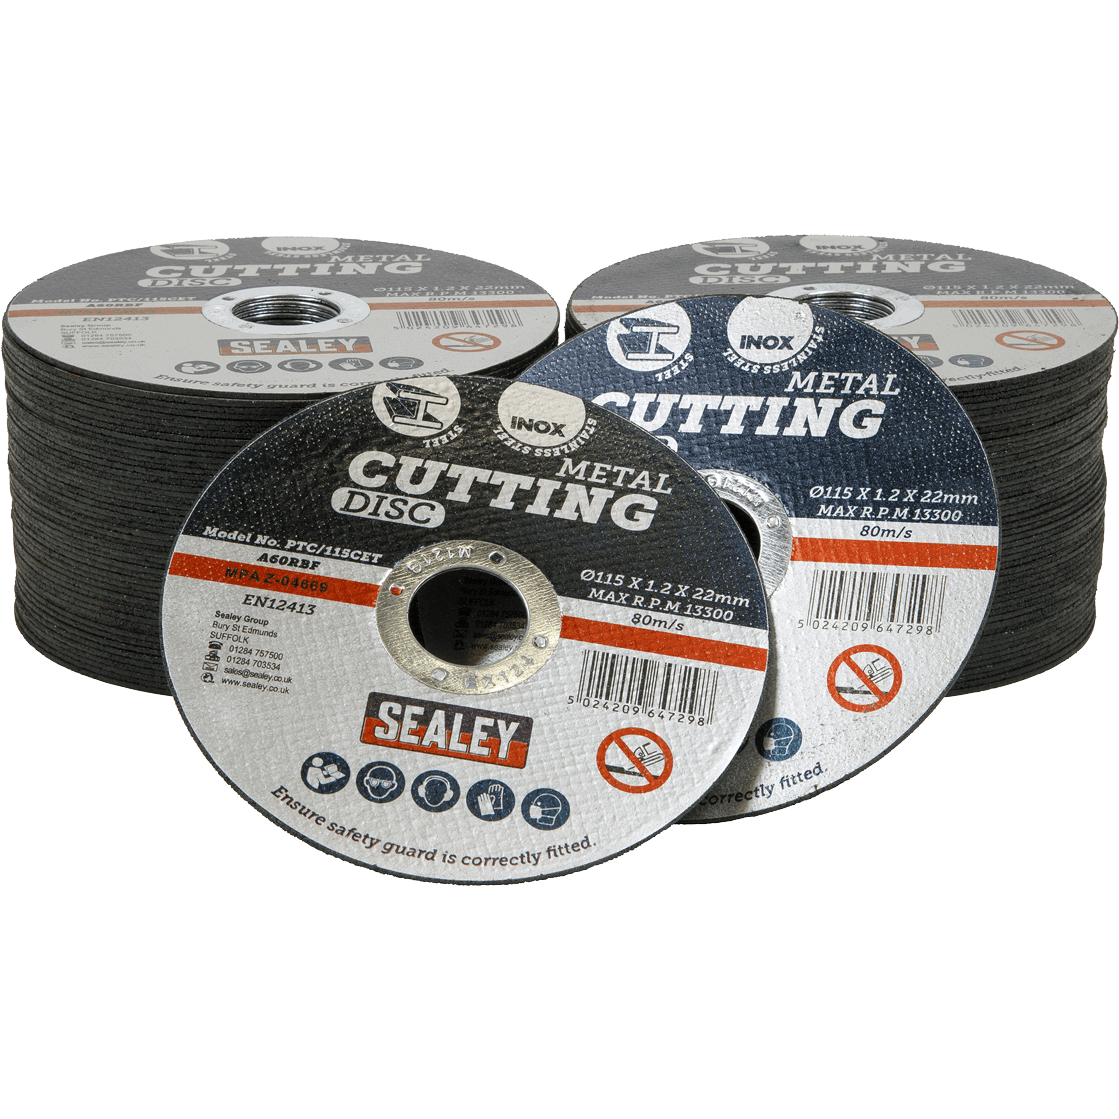 Sealey Metal Cutting Disc 115mm 1.2mm Pack of 100